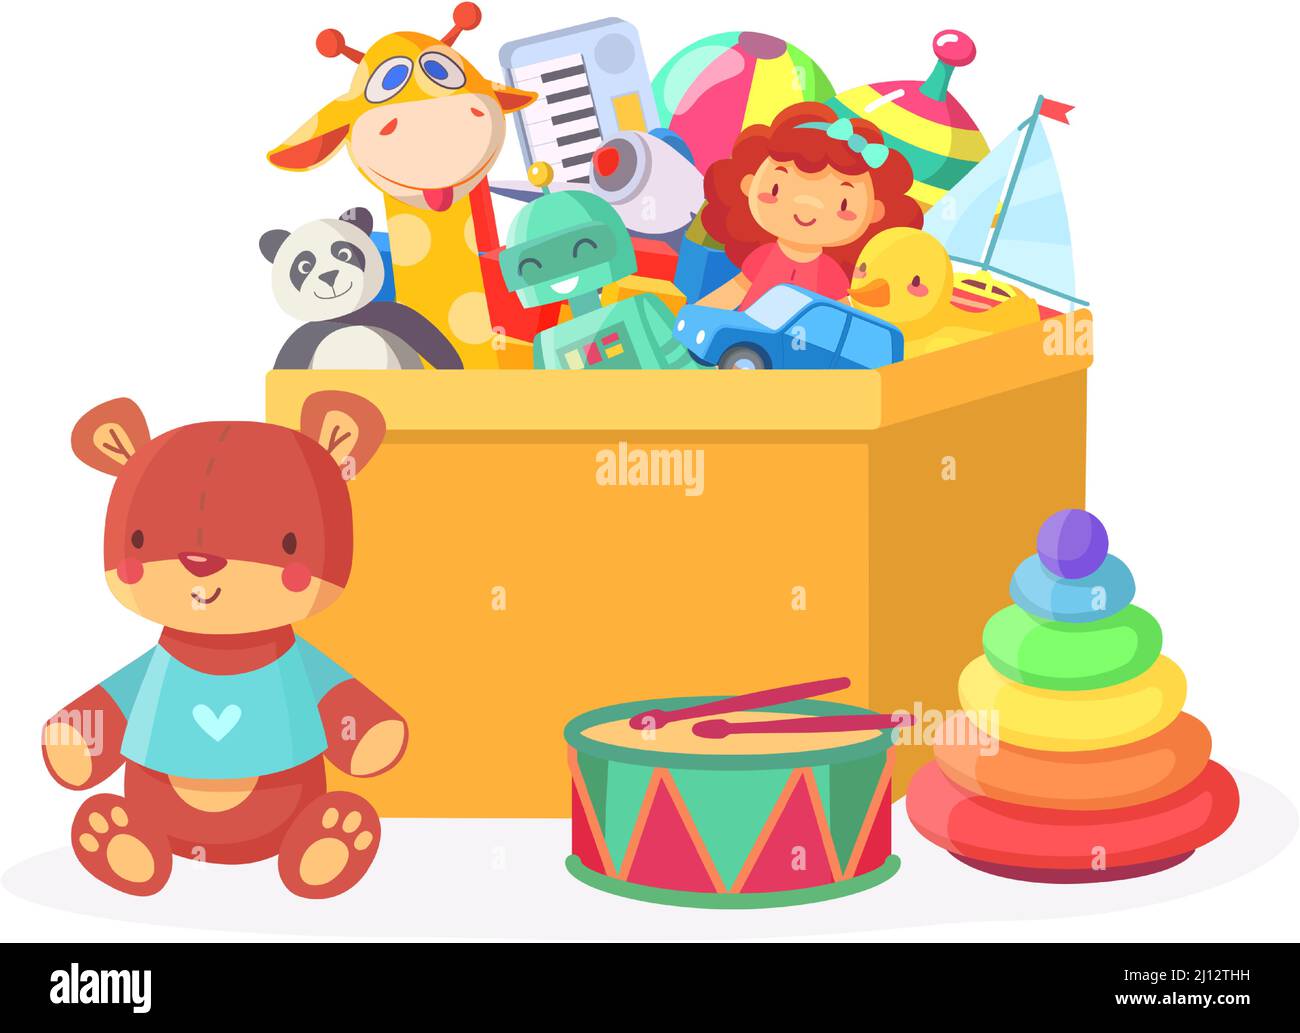 Kids toy box. Cartoon robot, doll, ball, teddy bear, giraffe, boat and panda in cardboard container for playroom Stock Vector